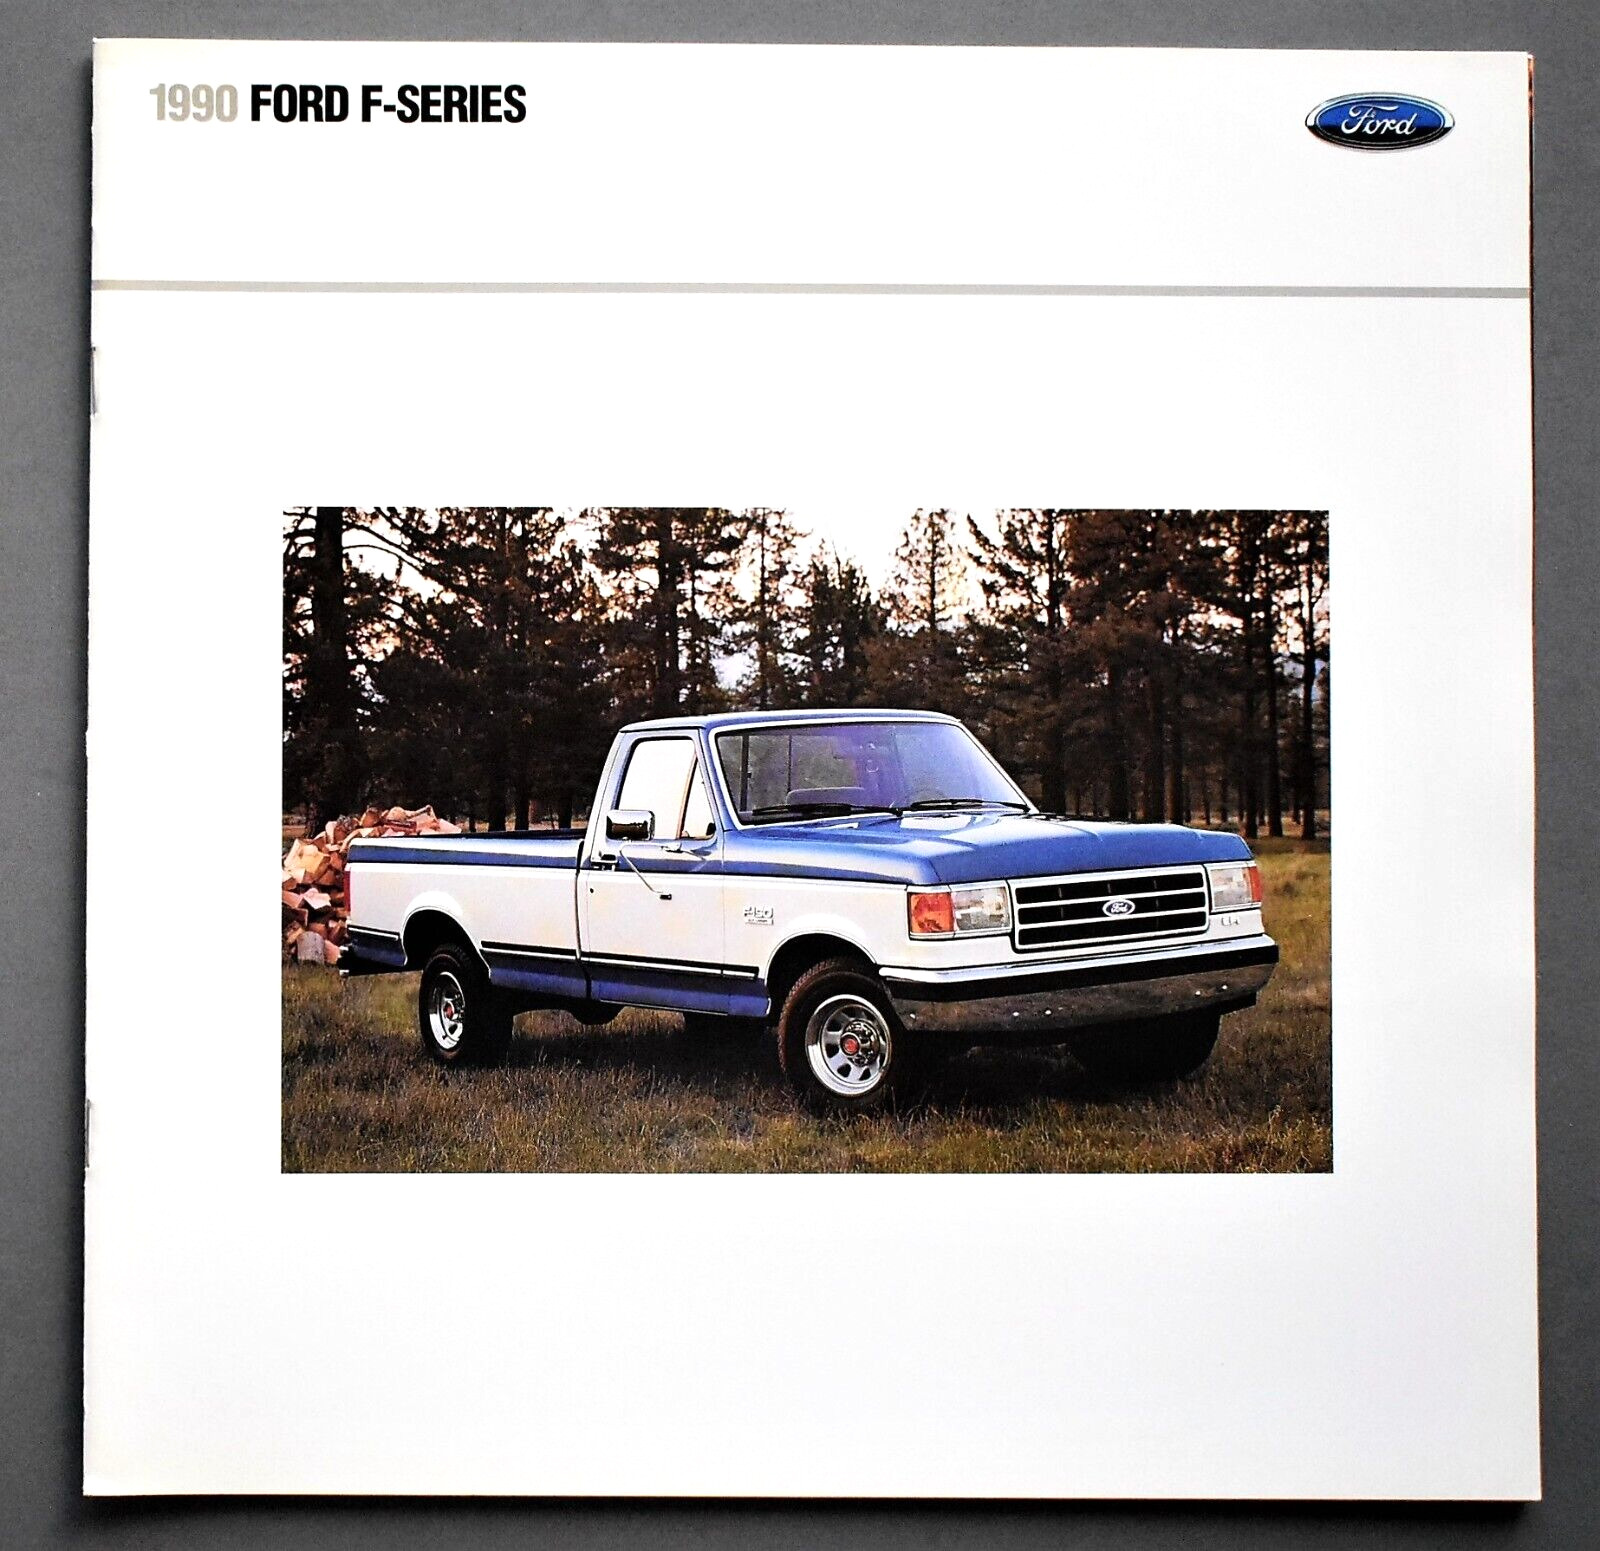 MINT 1990 FORD F SERIES PICKUP SALES BROCHURE CATALOG ~ 24 PAGES